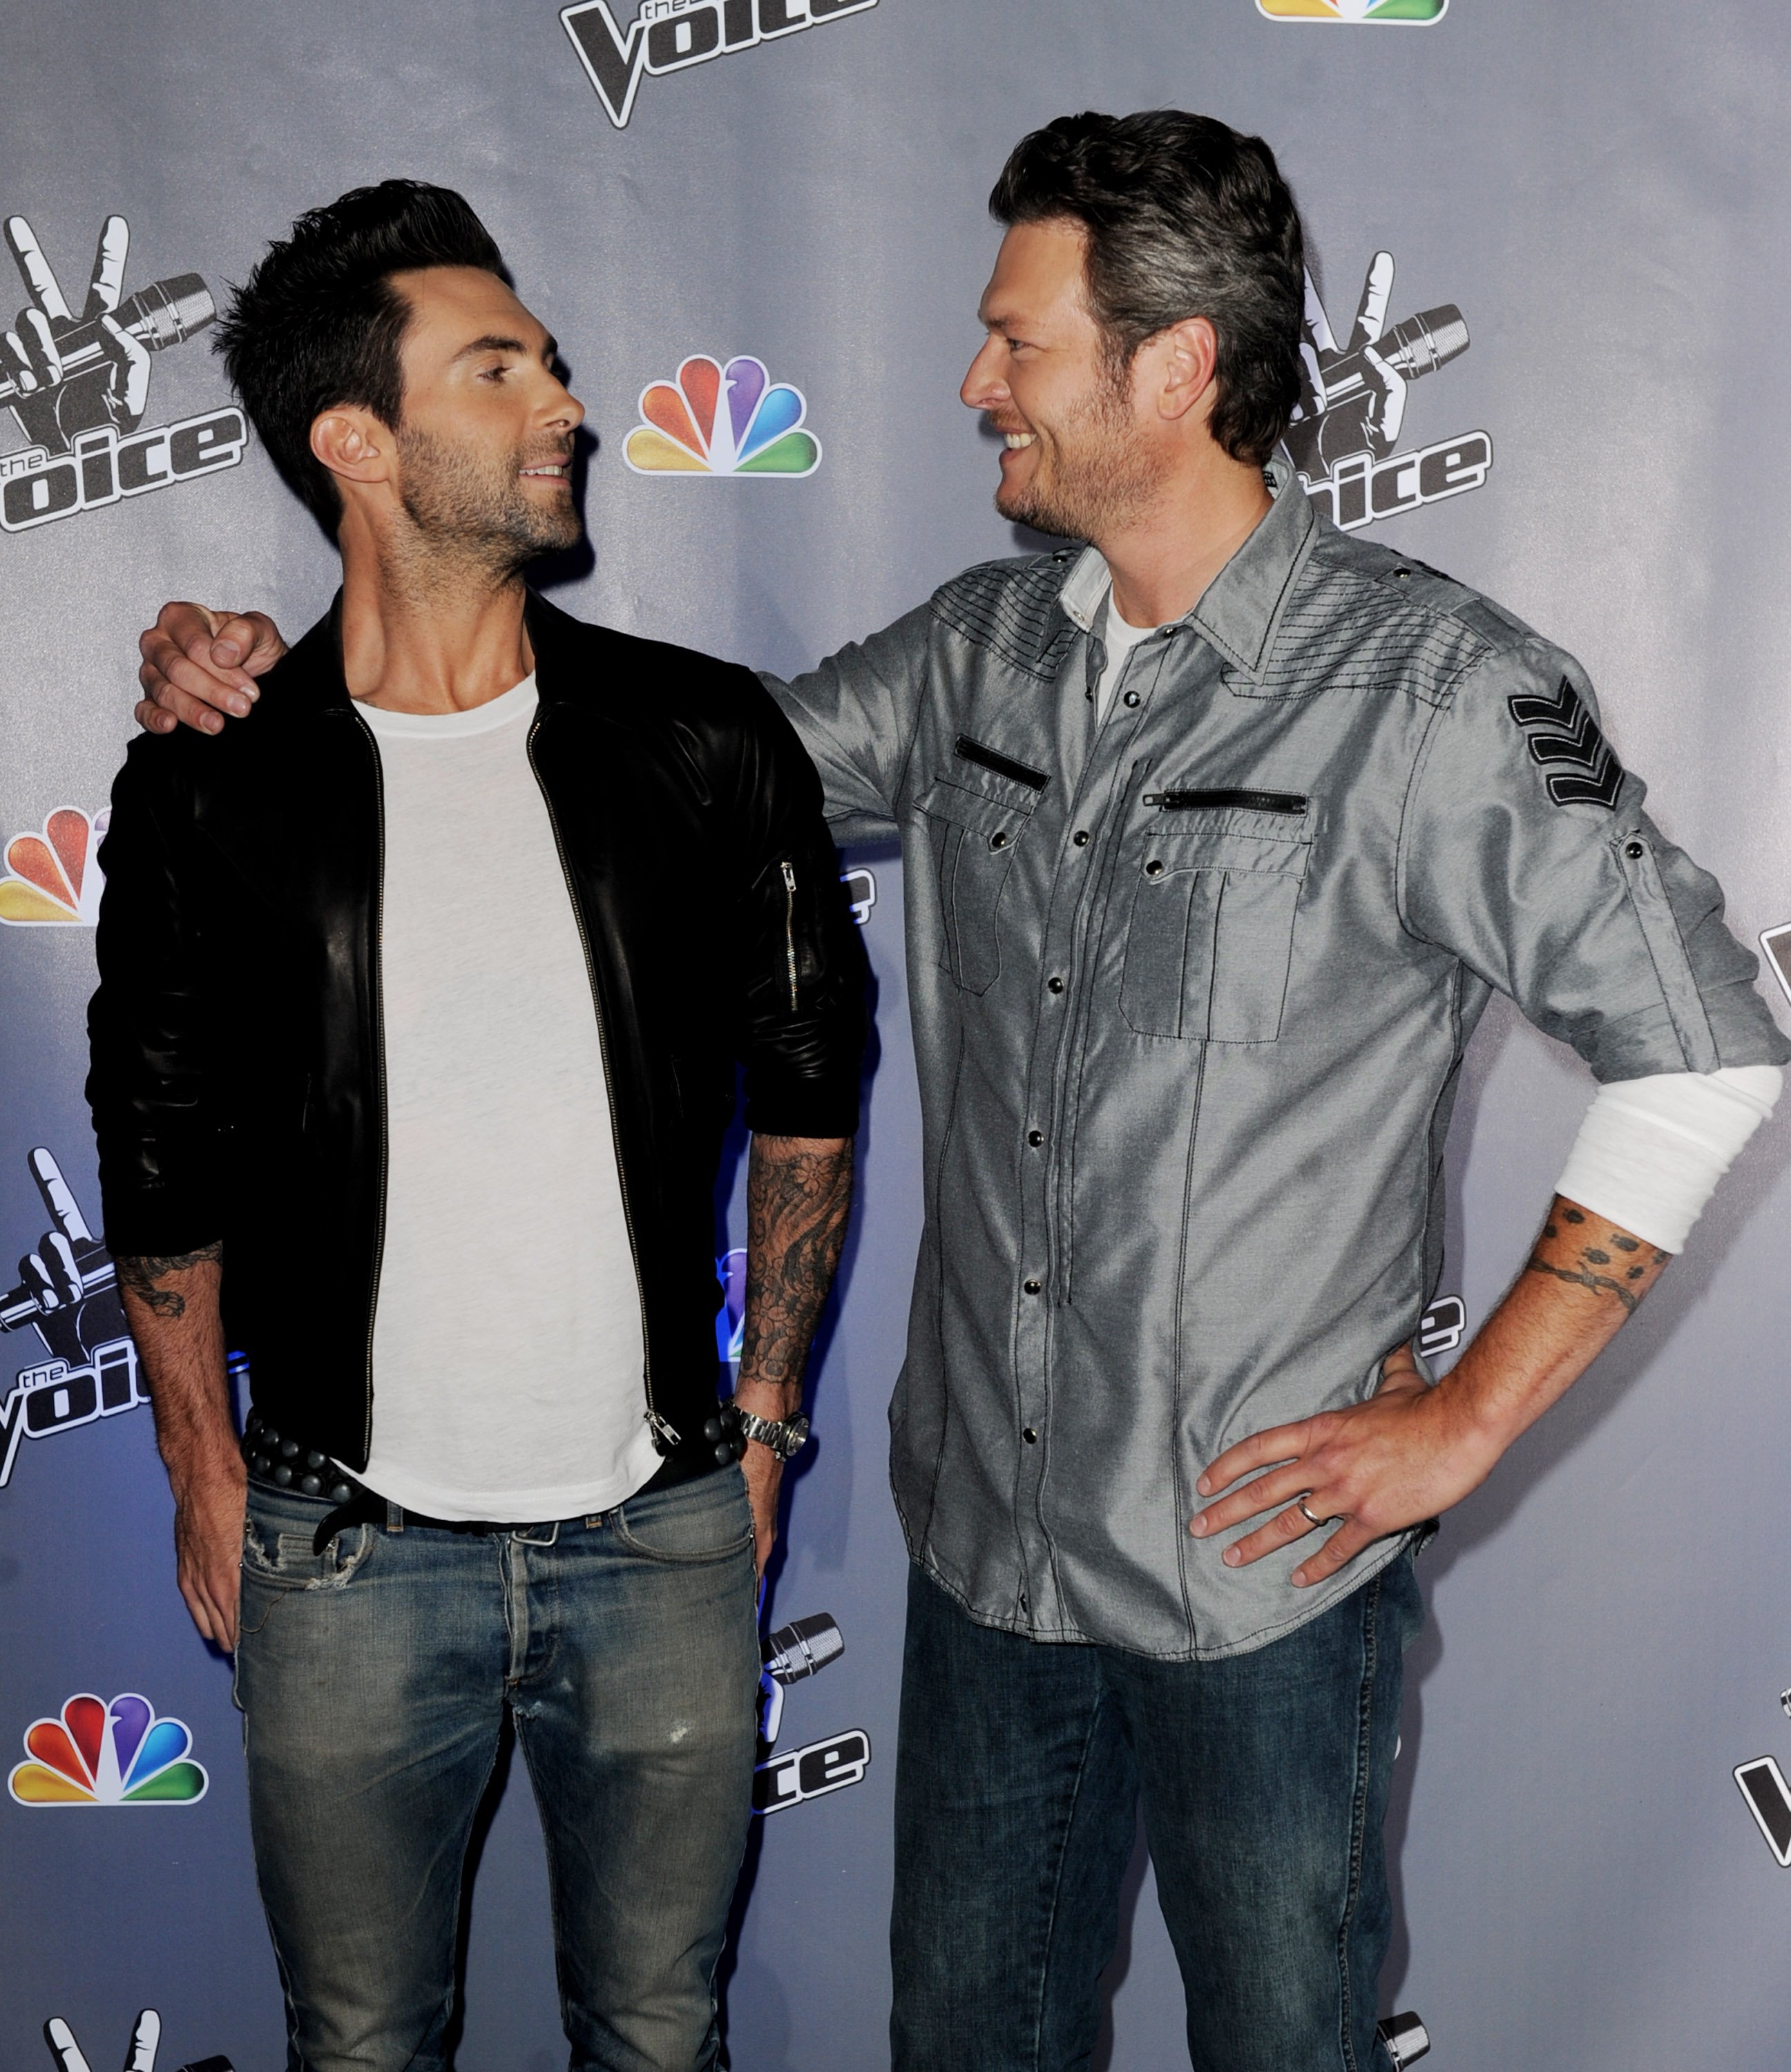 Adam Levine and Blake Shelton appear at a press junket for "The Voice" in Culver City, California on October 28, 2011 | Photo: Getty Images